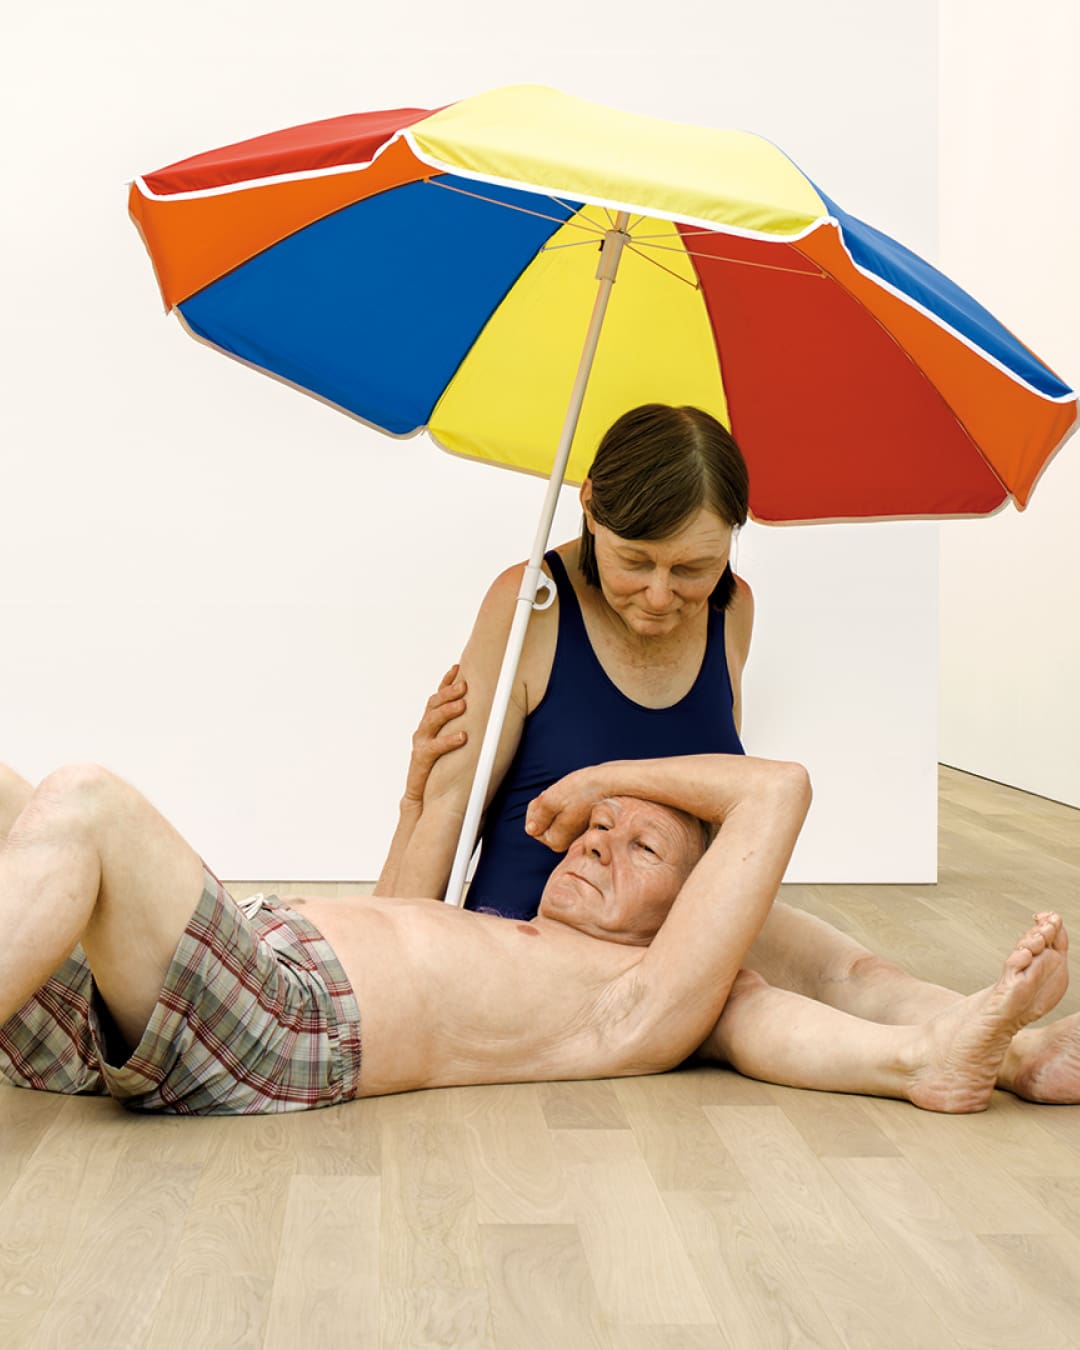 The best museums and art galleries in Amsterdam | The sculpture Couple Under an Umbrella by Ron Mueck on display at Museum Voorlinden